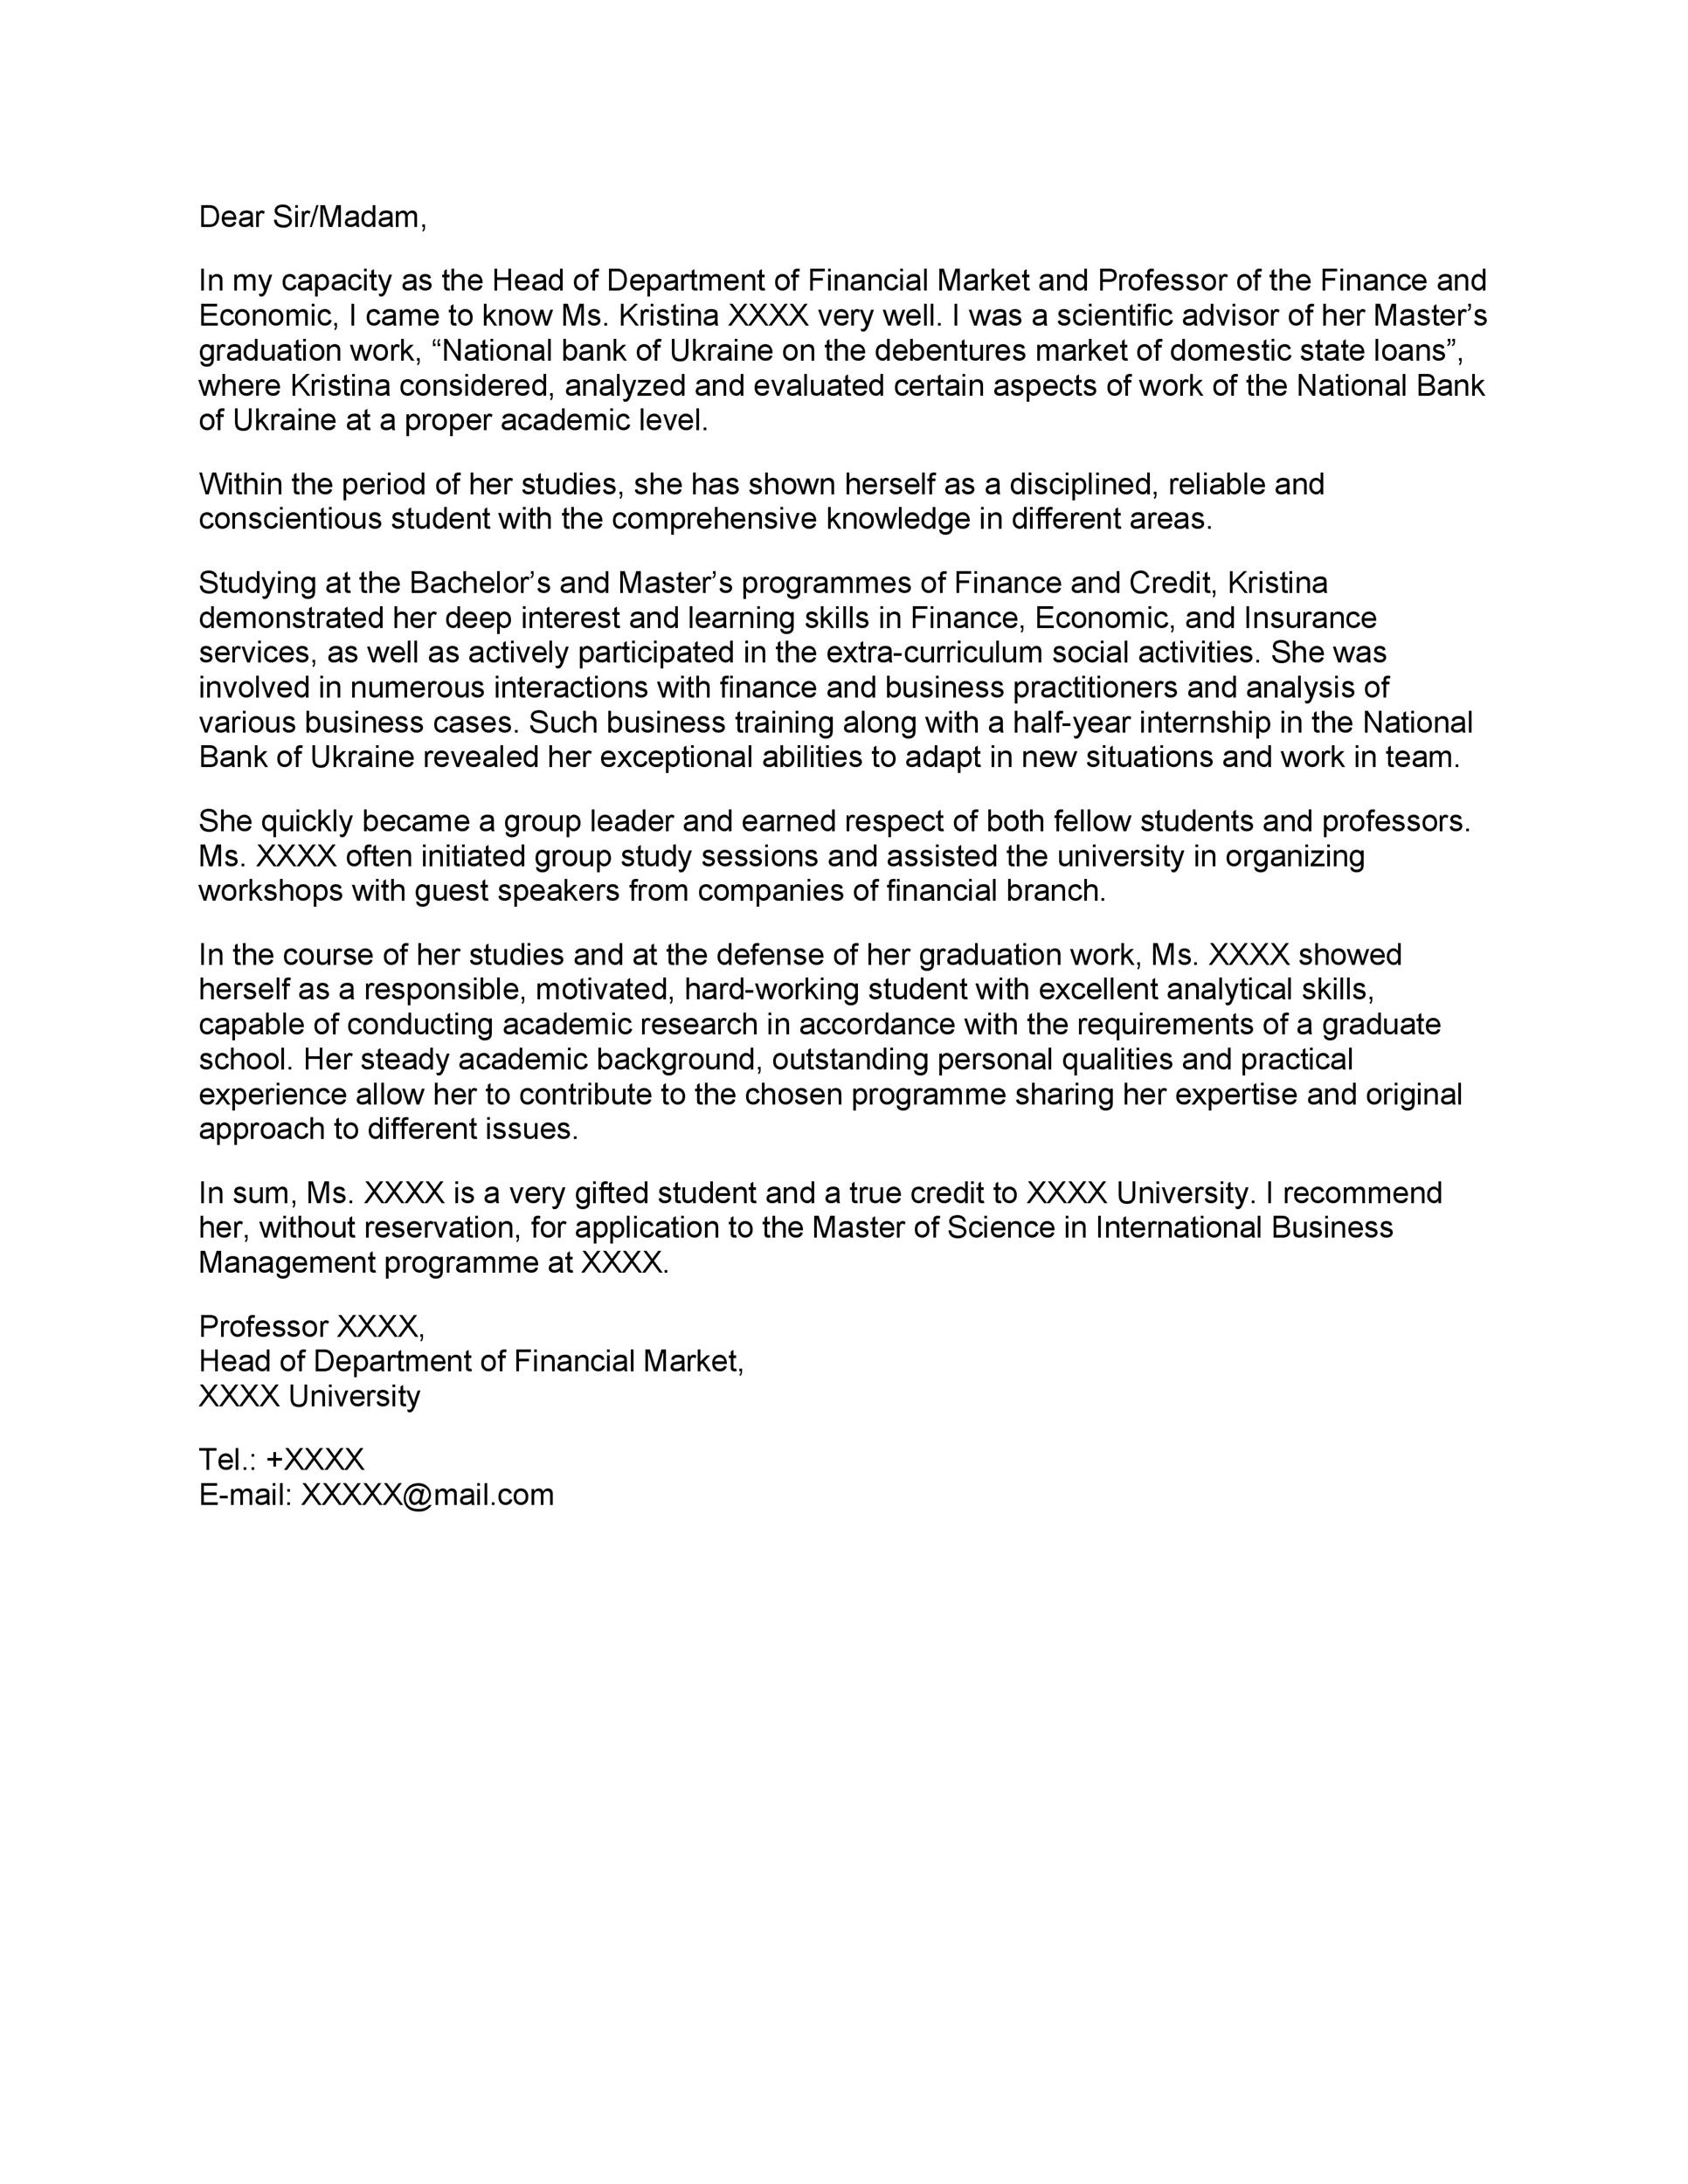 Letter Of Recommendation For Phd Program from templatelab.com